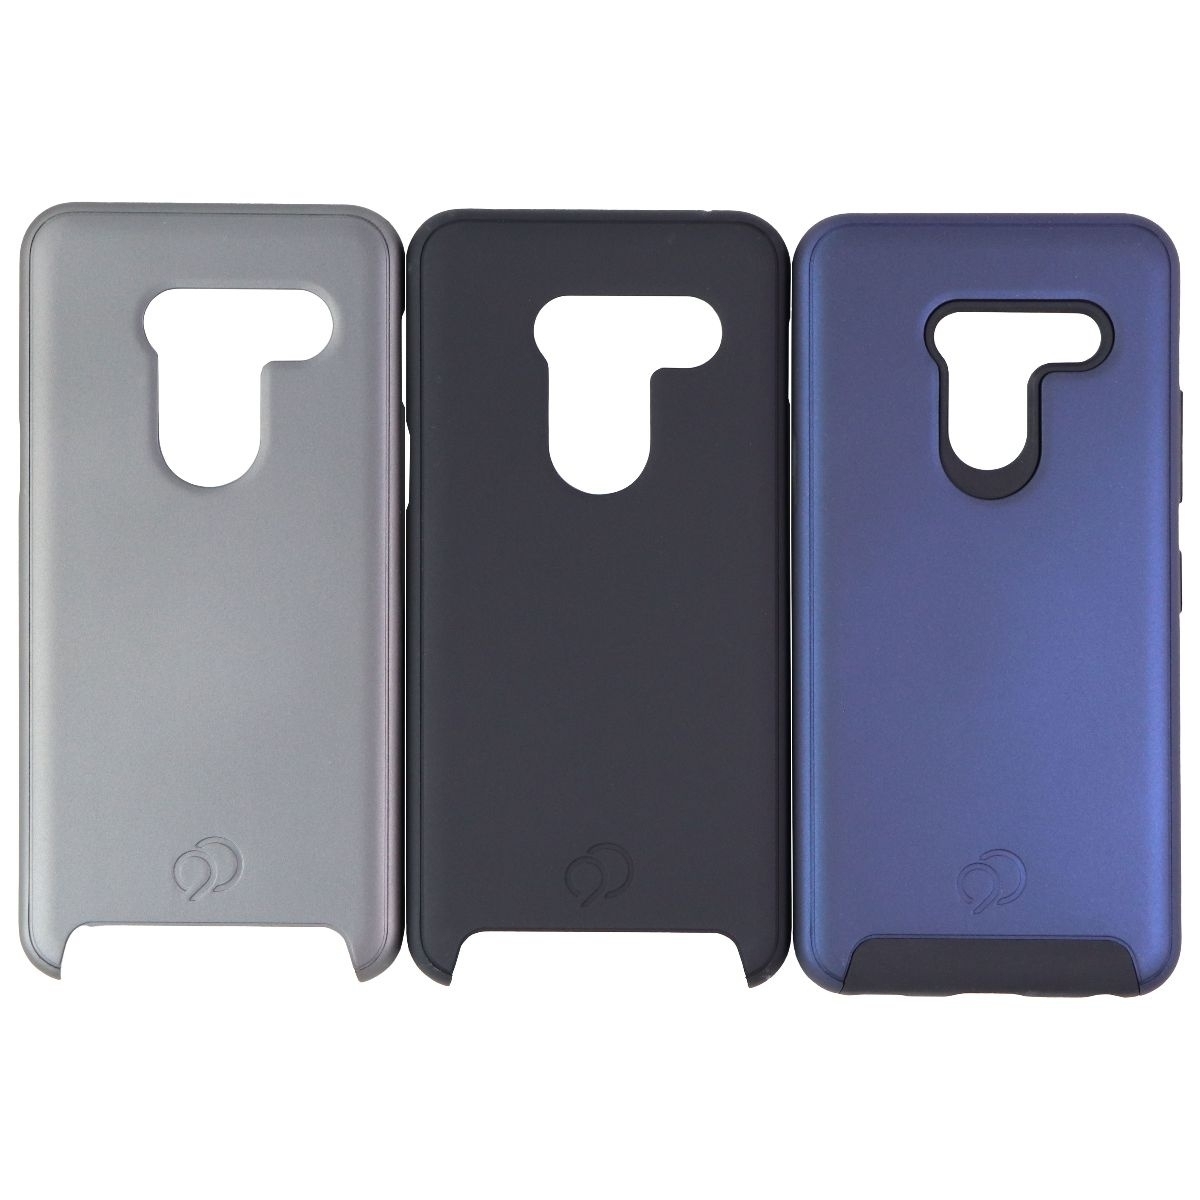 Nimbus9 Lifestyle Kit Pro With 3 Cases For LG G8 ThinQ - Midnight Collection